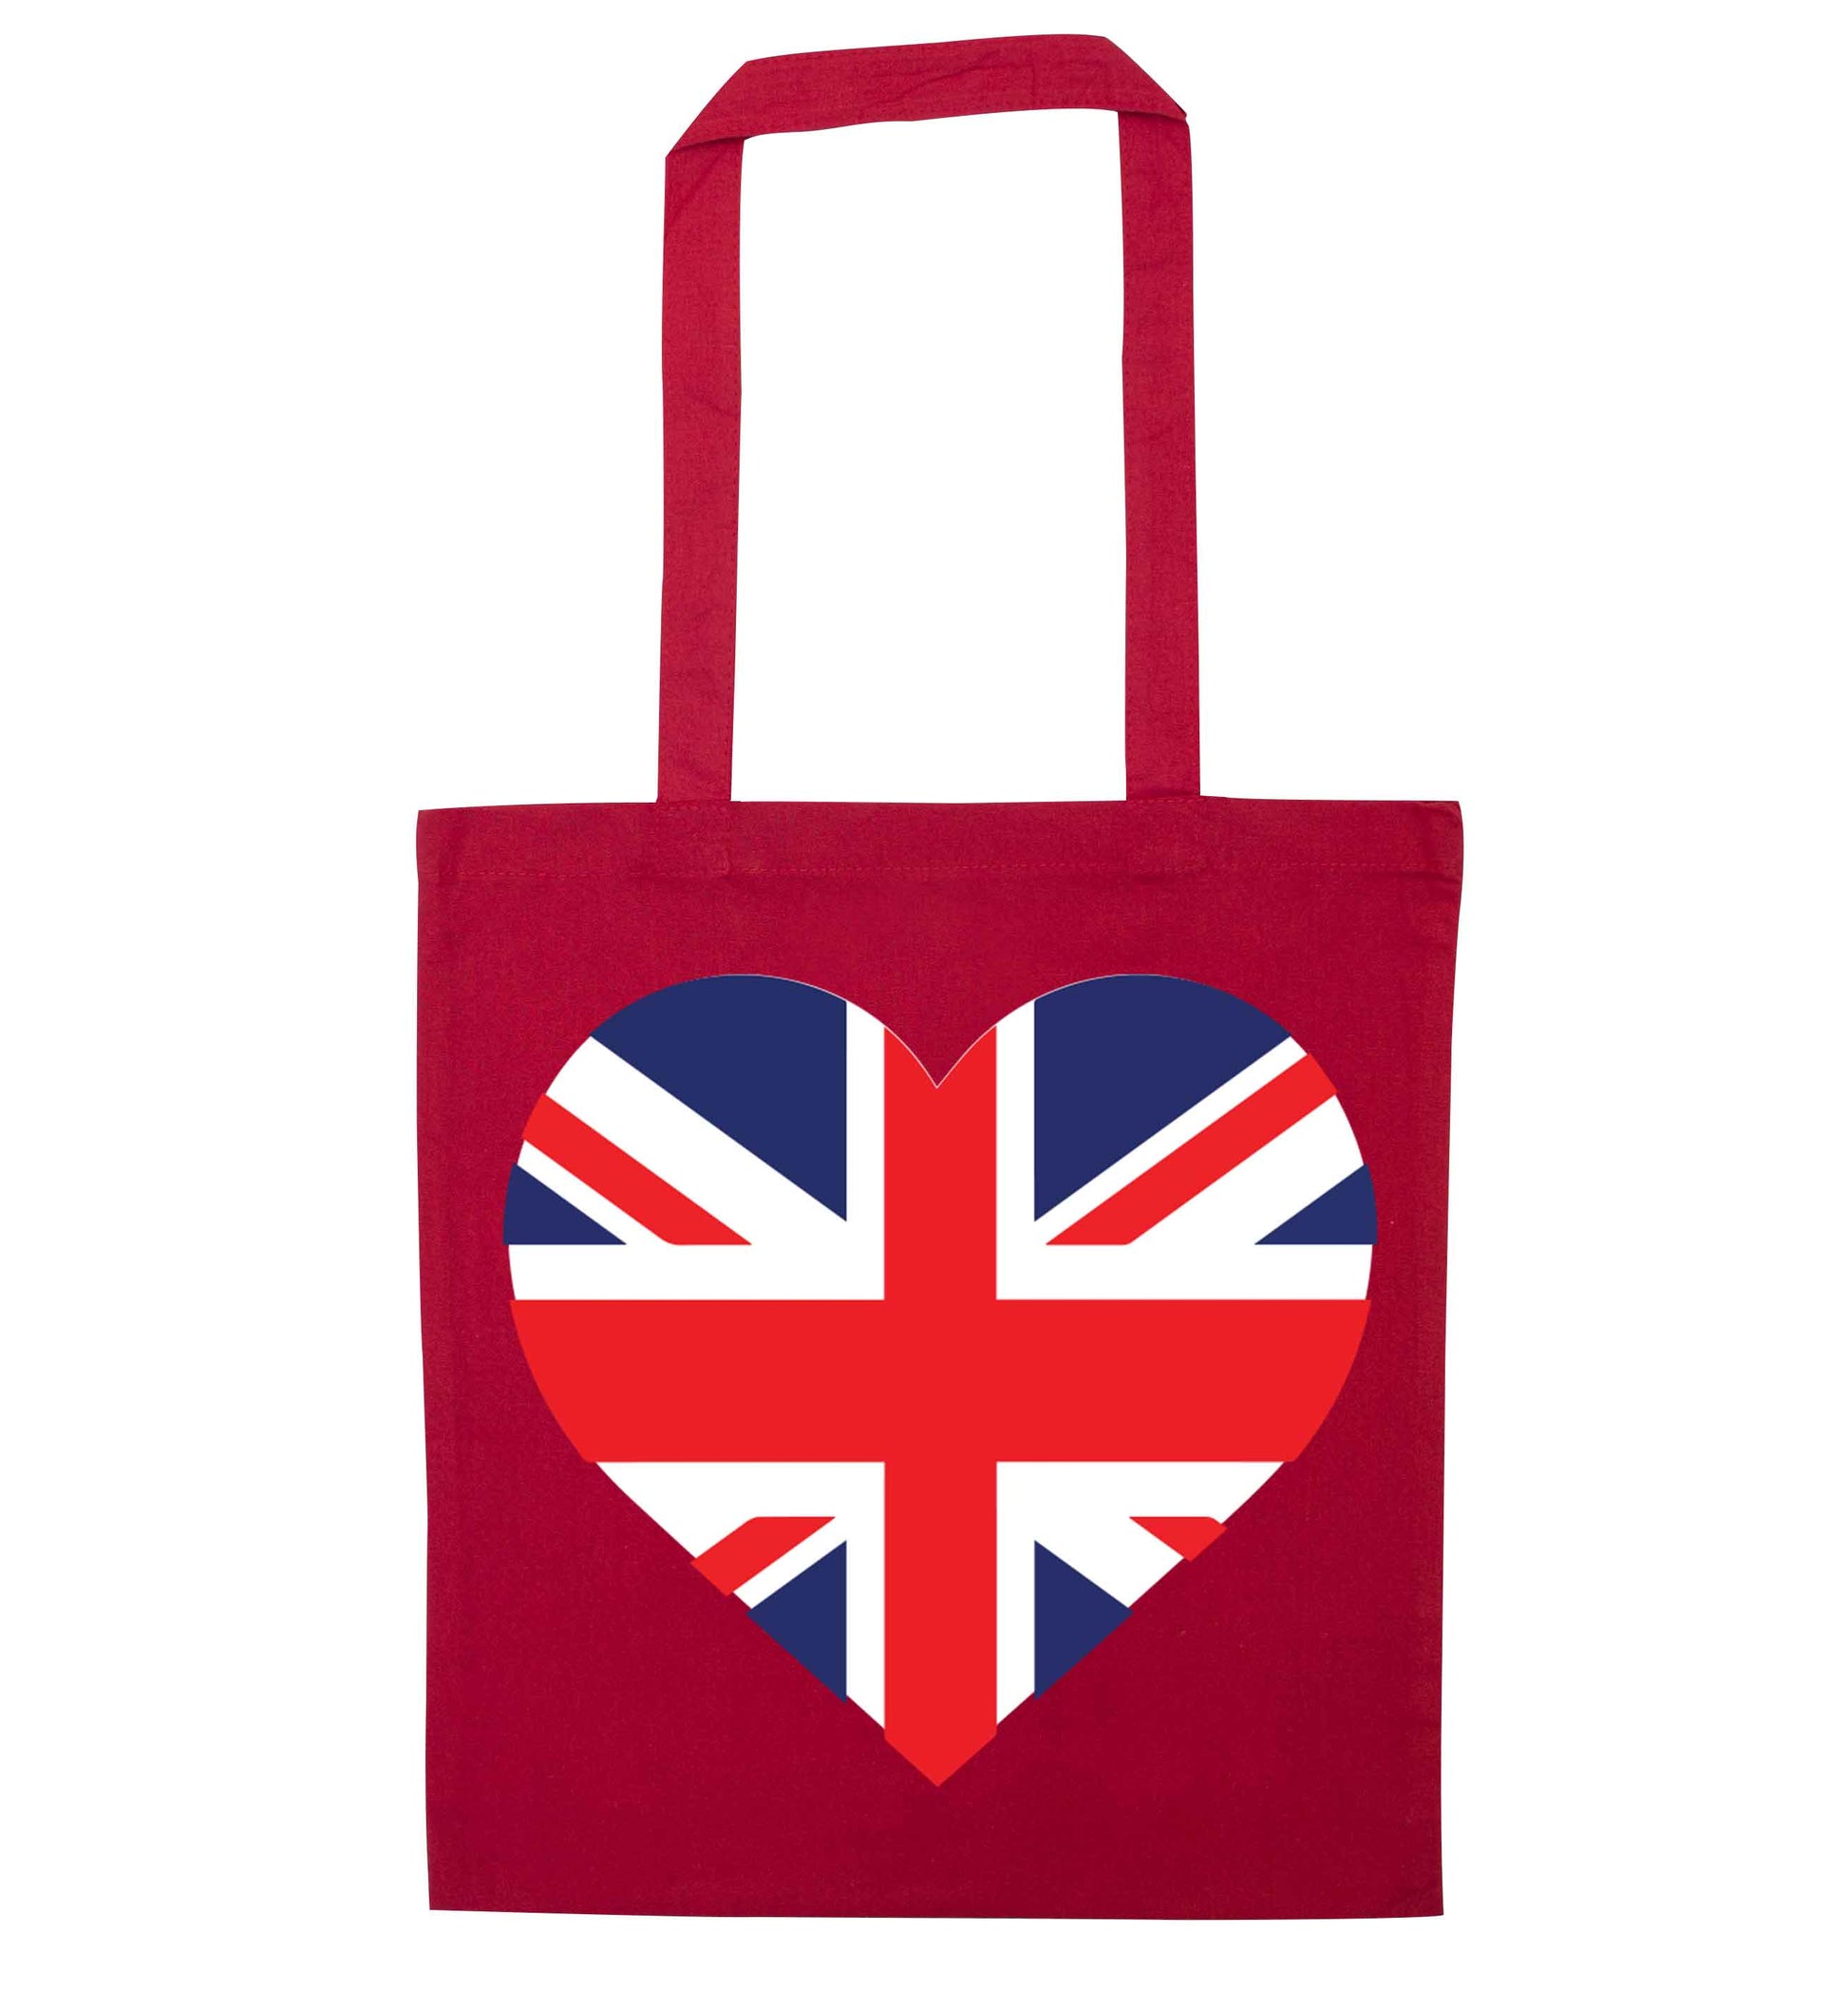 Union Jack Heart red tote bag